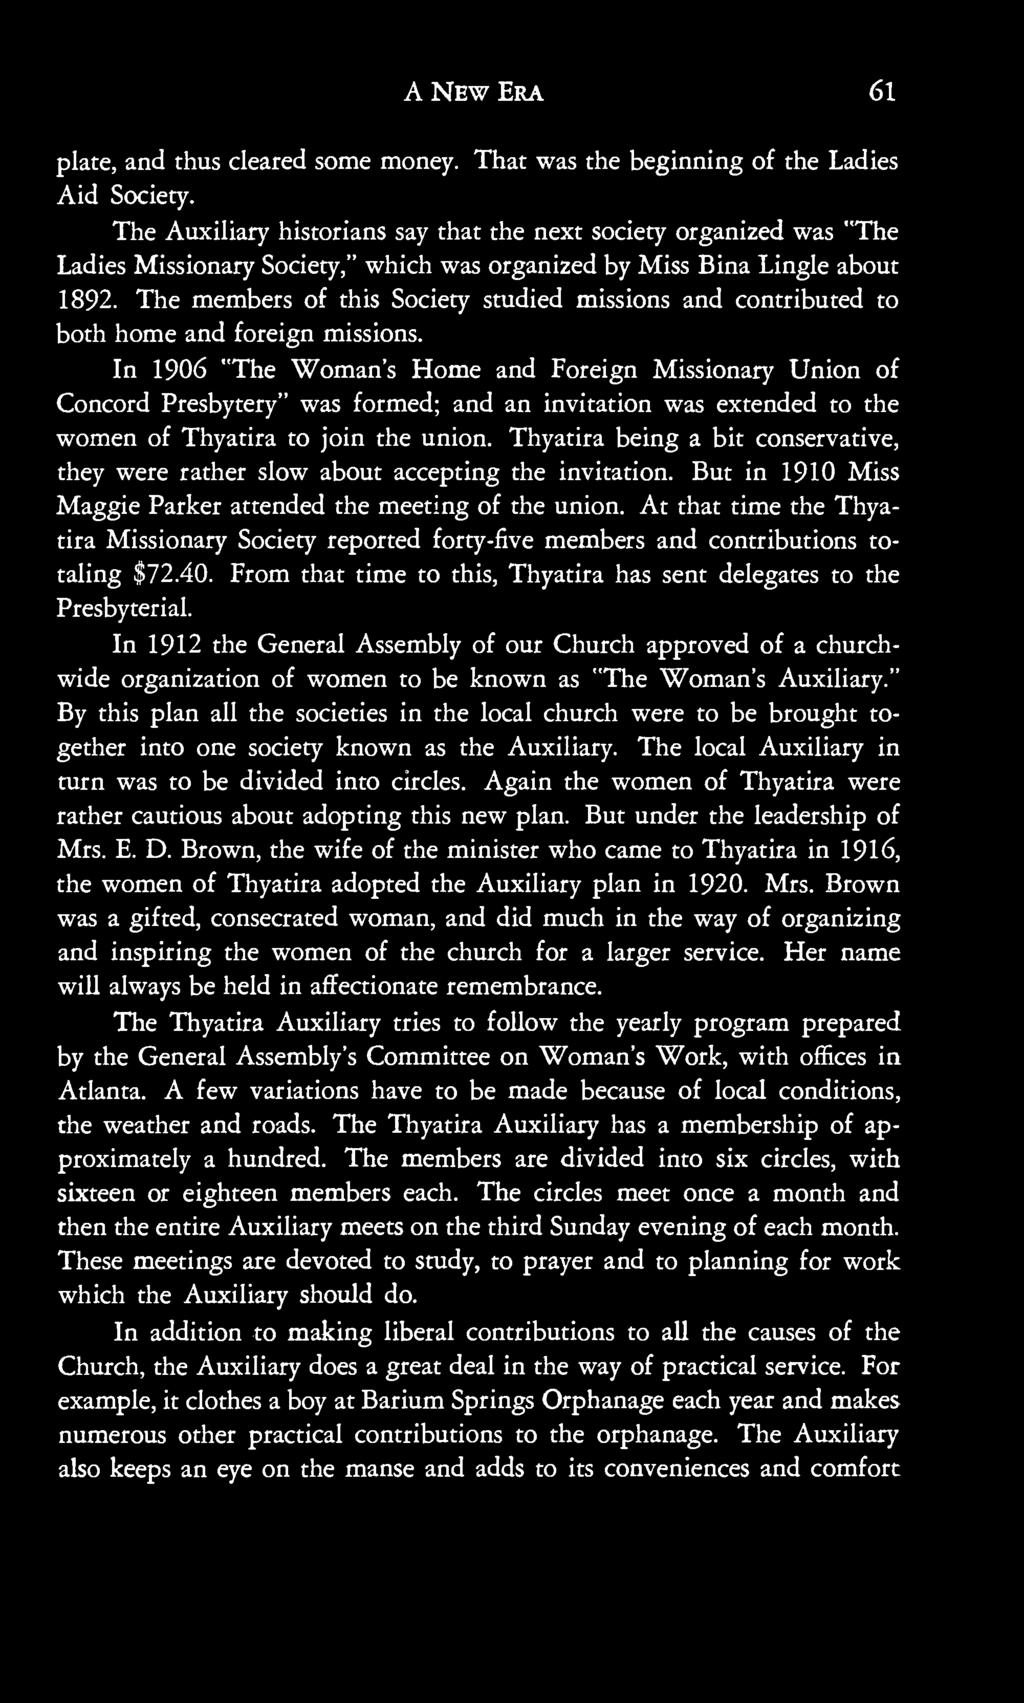 Thyatira being a bit conservative, they were rather slow about accepting the invitation. But in 1910 Miss Maggie Parker attended the meeting of the union.